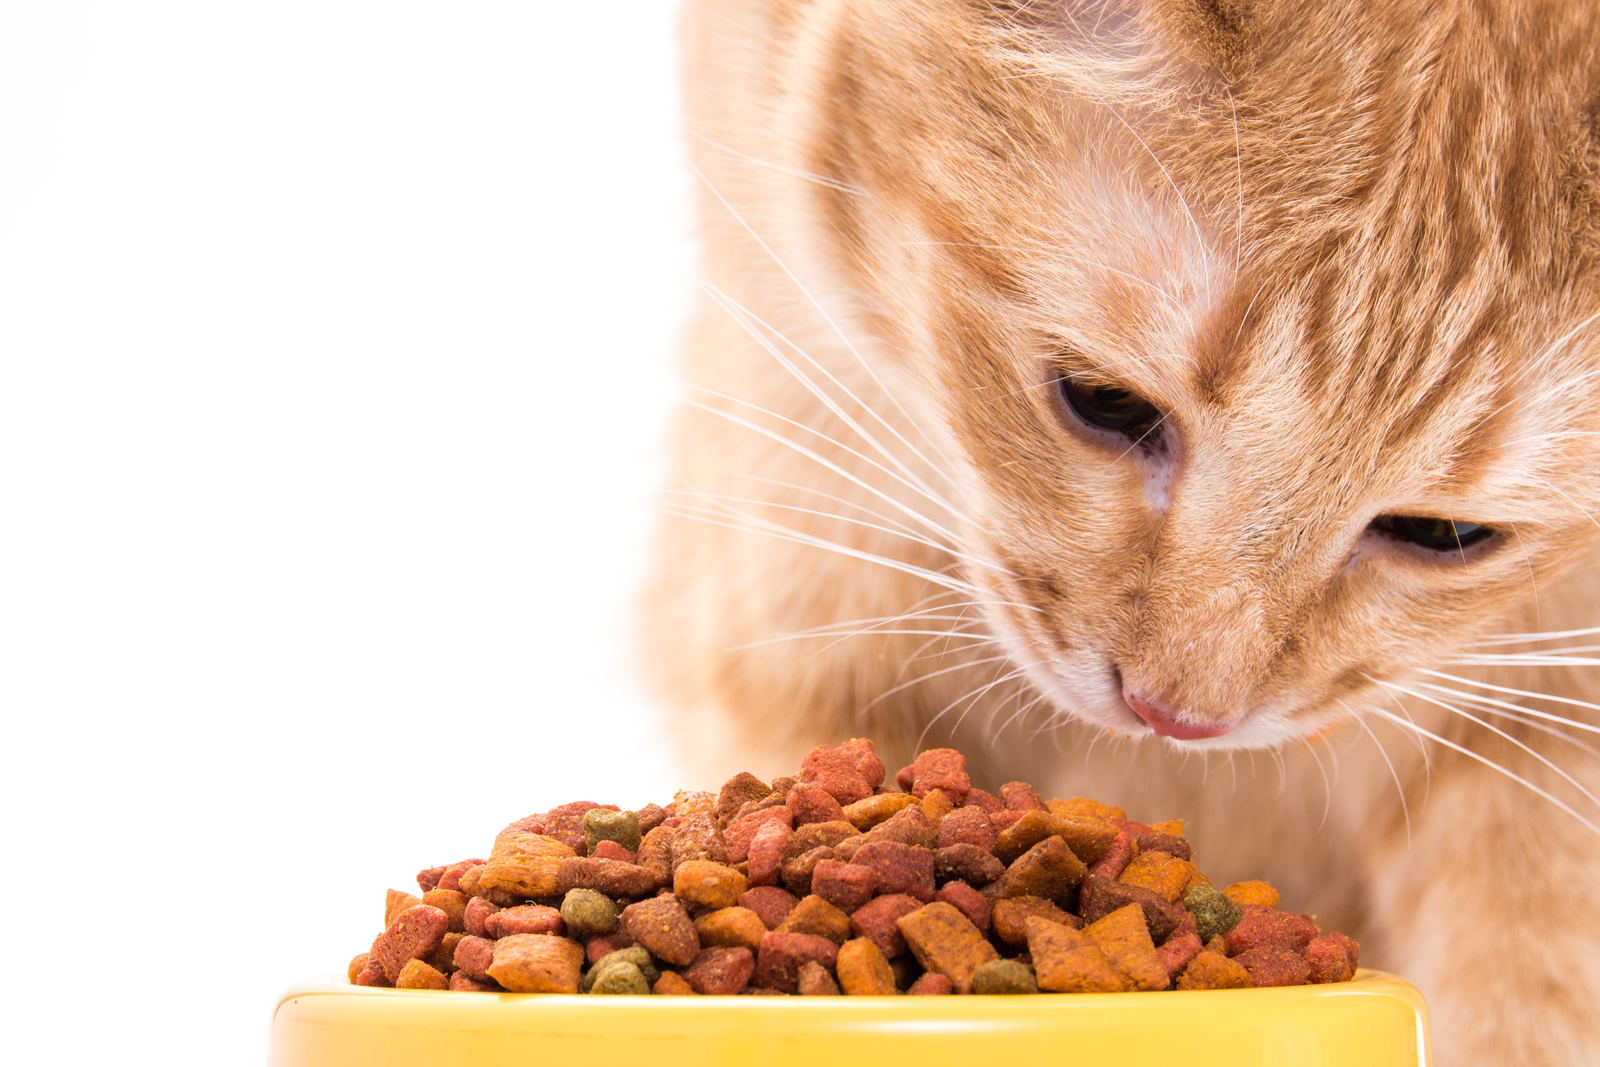 Column: Consequences of negative pet food claims